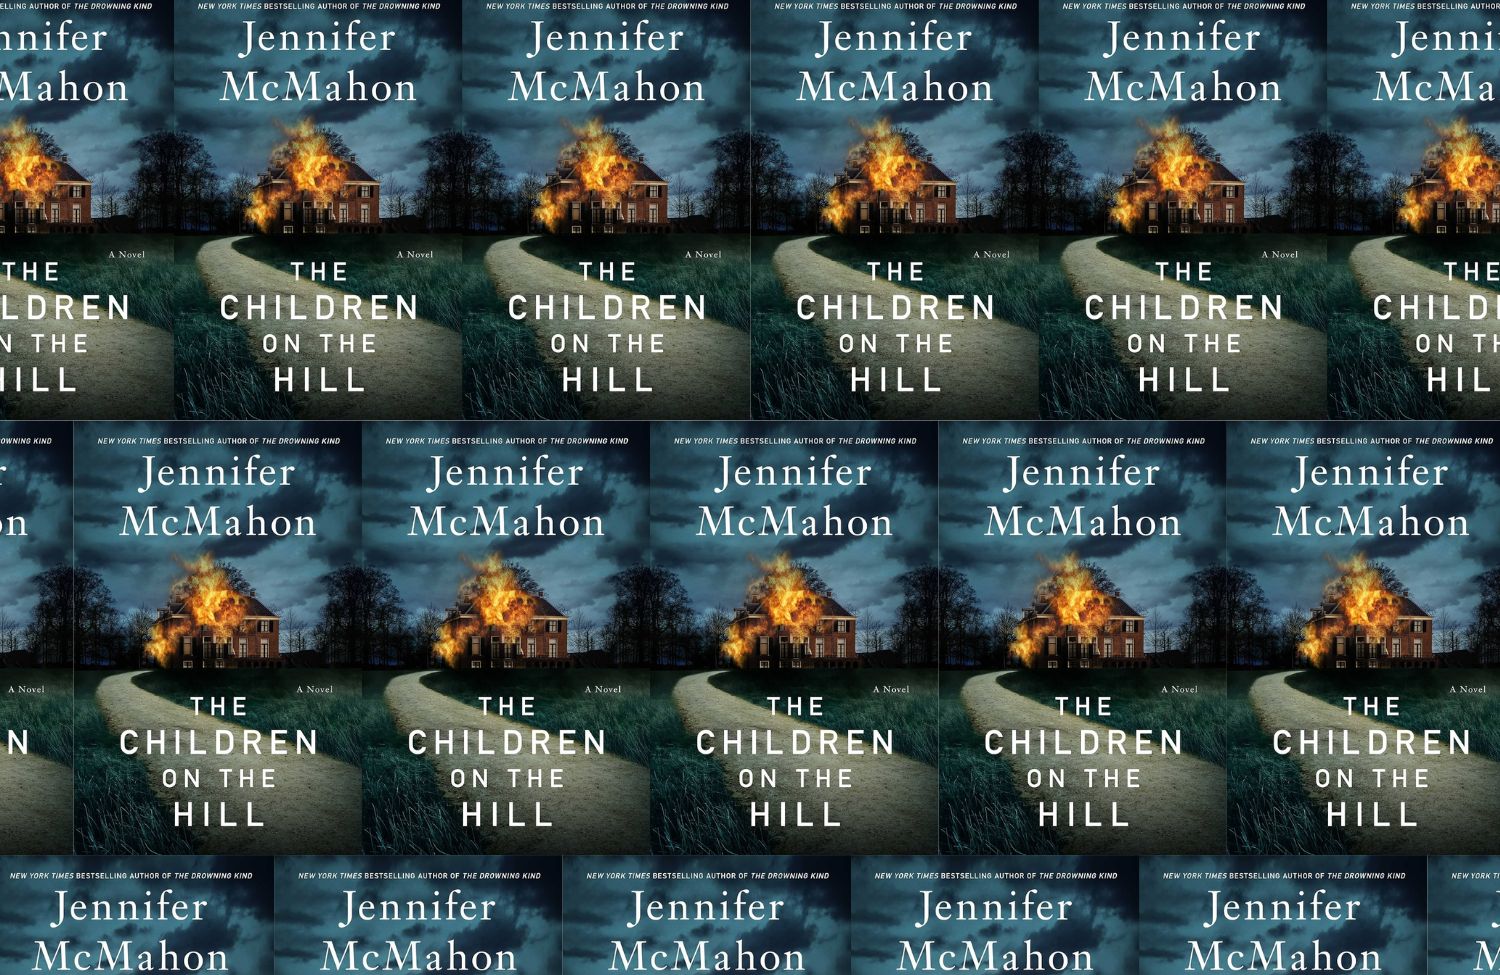 Titled images of the book cover for Jennifer McMahon's book, The Children on the Hill. Cover shows a burning house with a path lined with grass leading up to it.